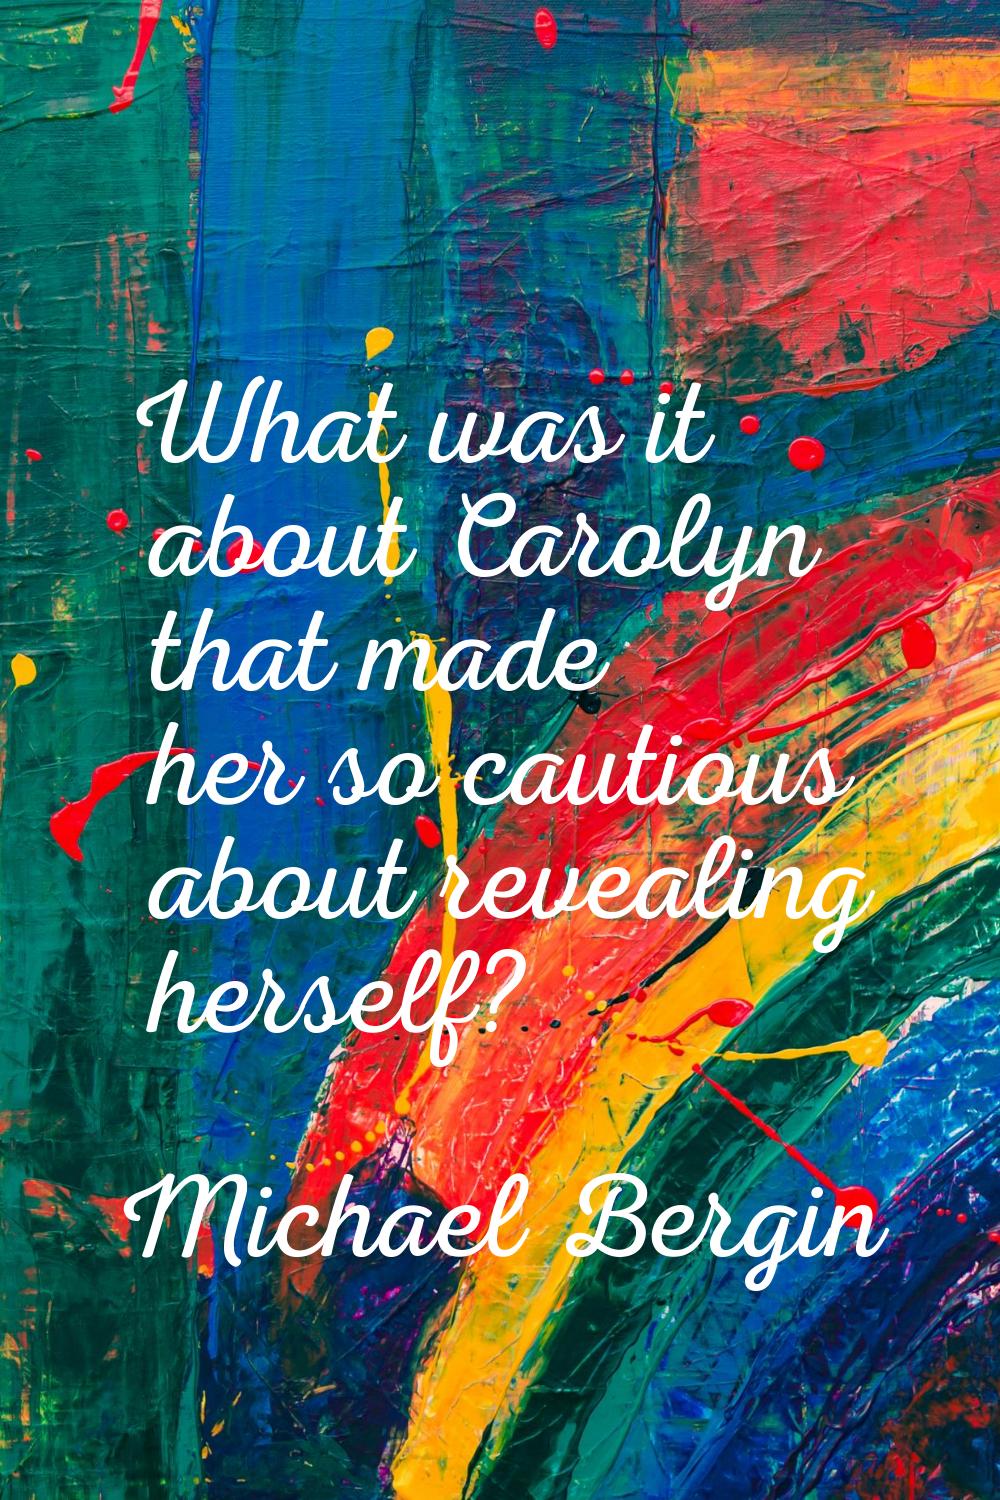 What was it about Carolyn that made her so cautious about revealing herself?